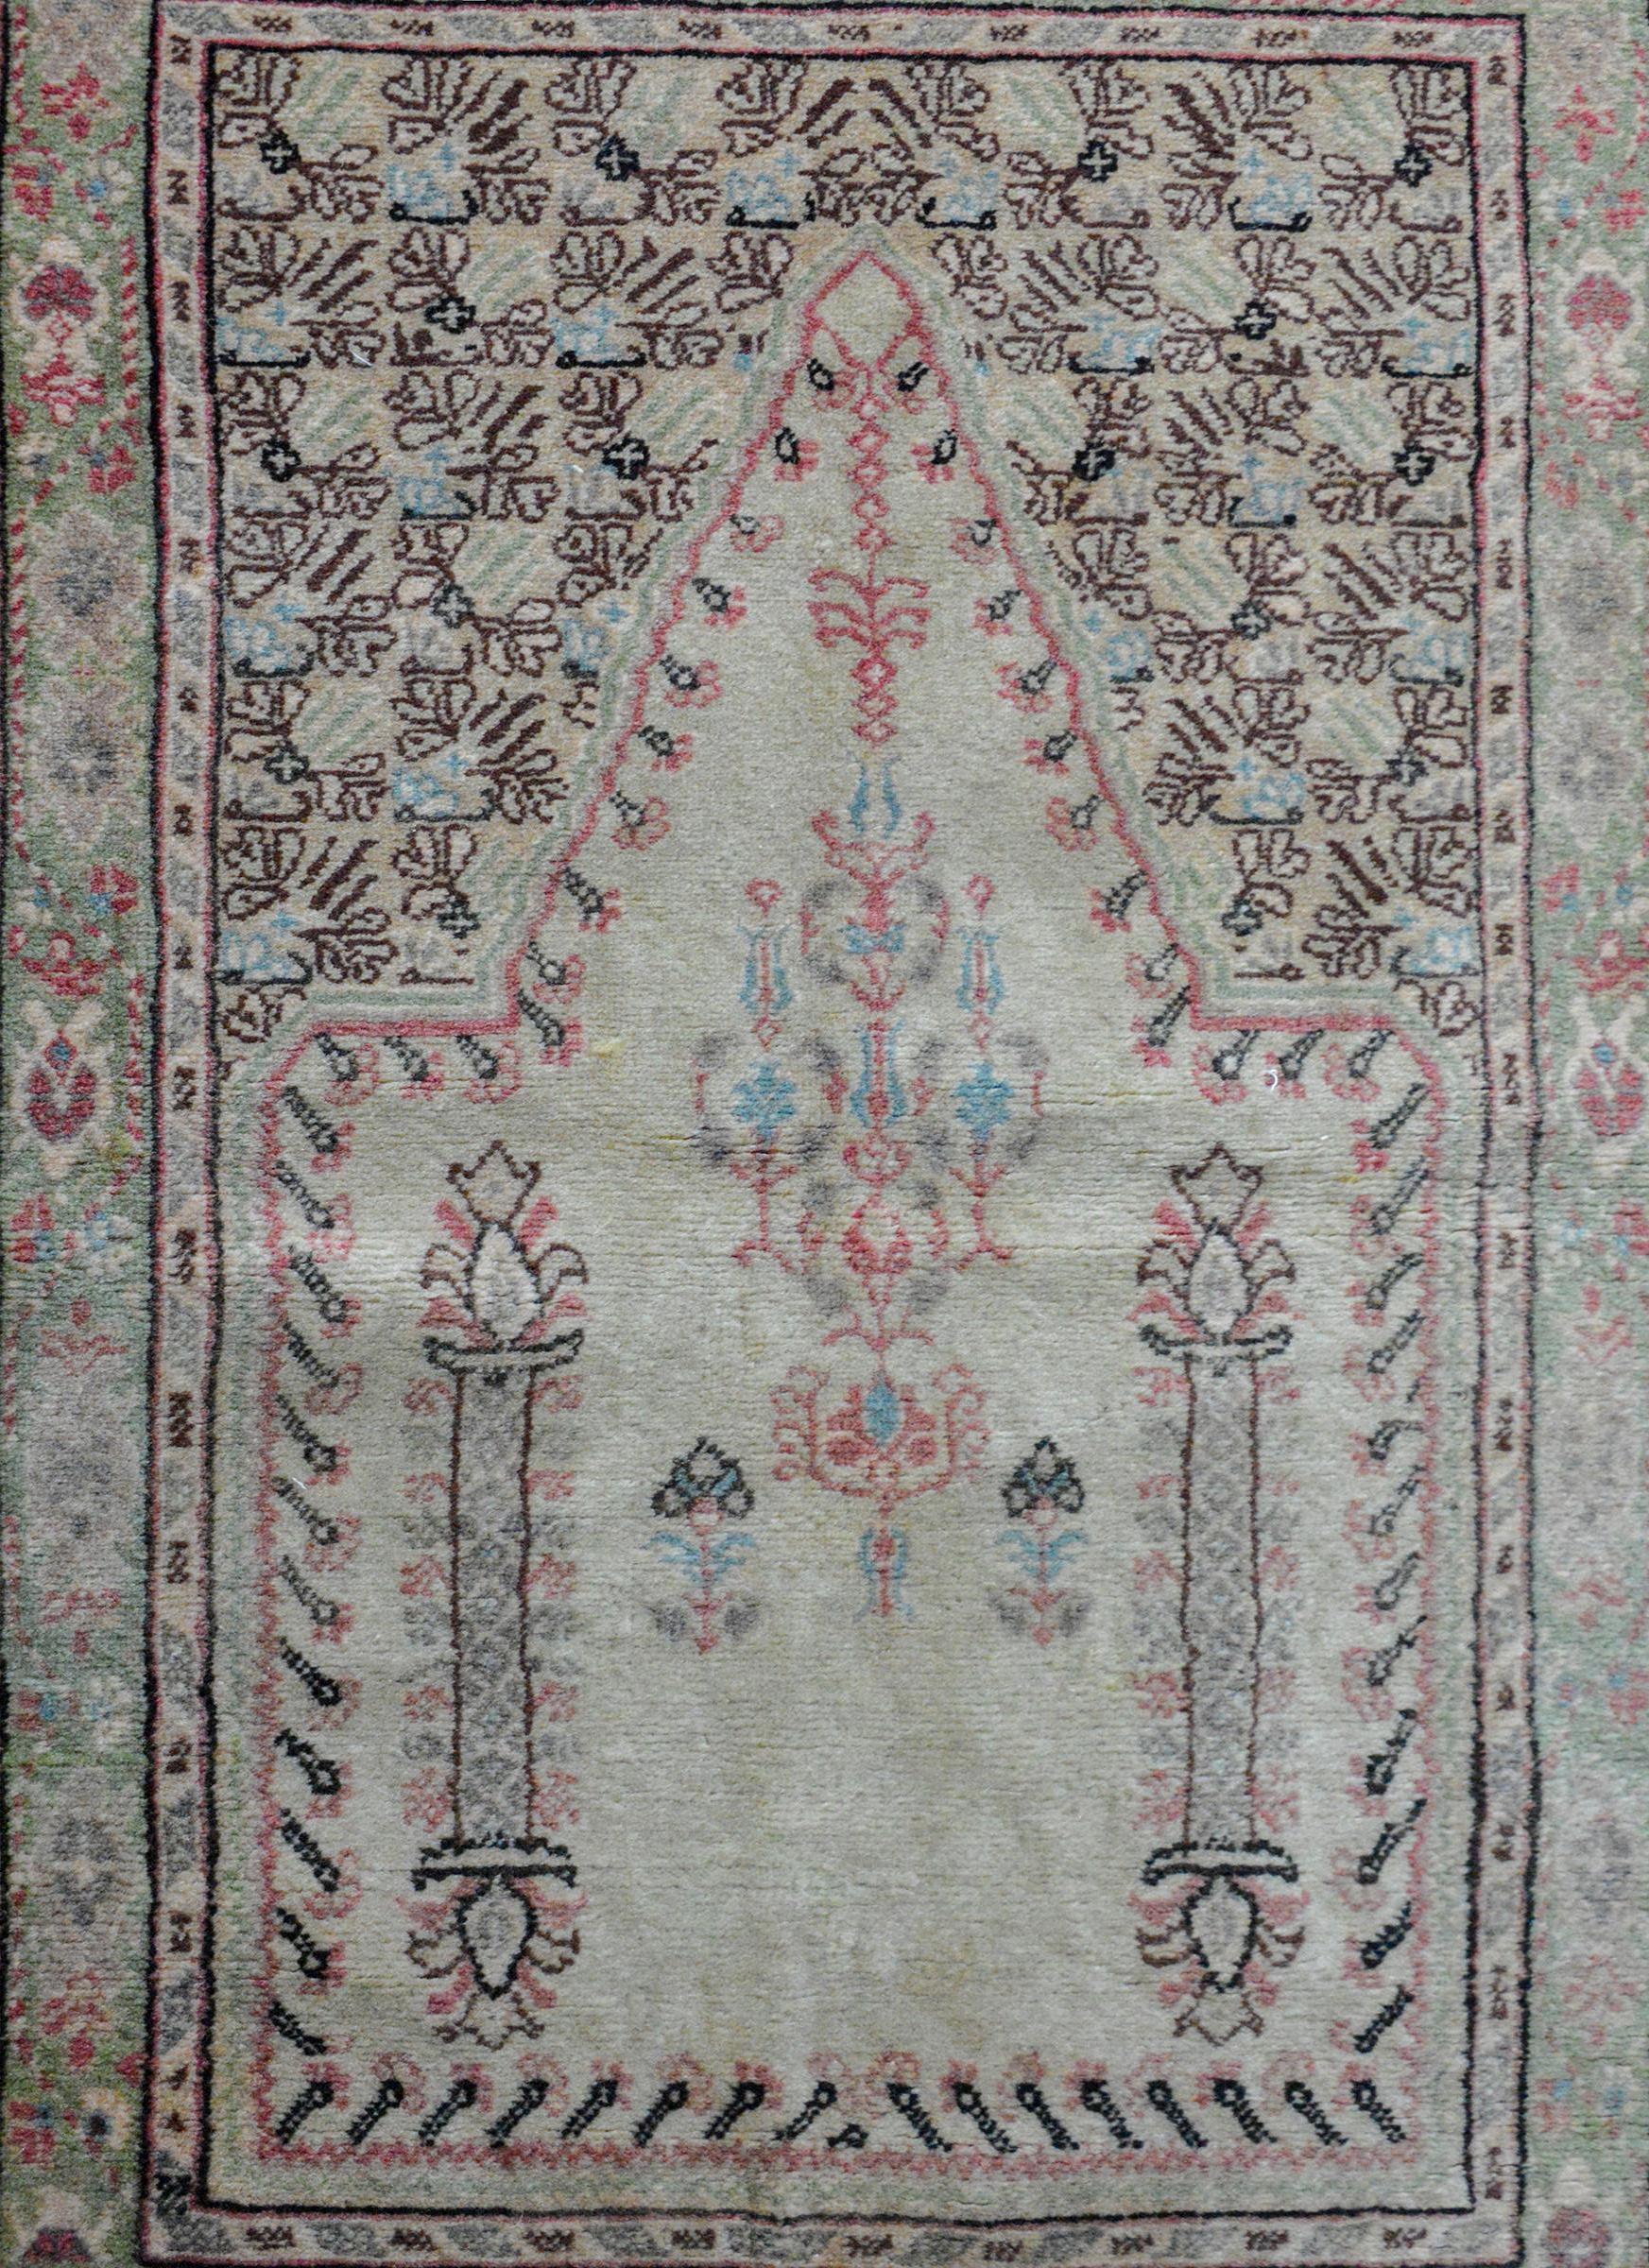 A vintage Turkish prayer rug with a luted color palette containing cream, pale green, pale indigo, and cranberry colors. The border is wonderful with several wide and thin floral partnered stripes.